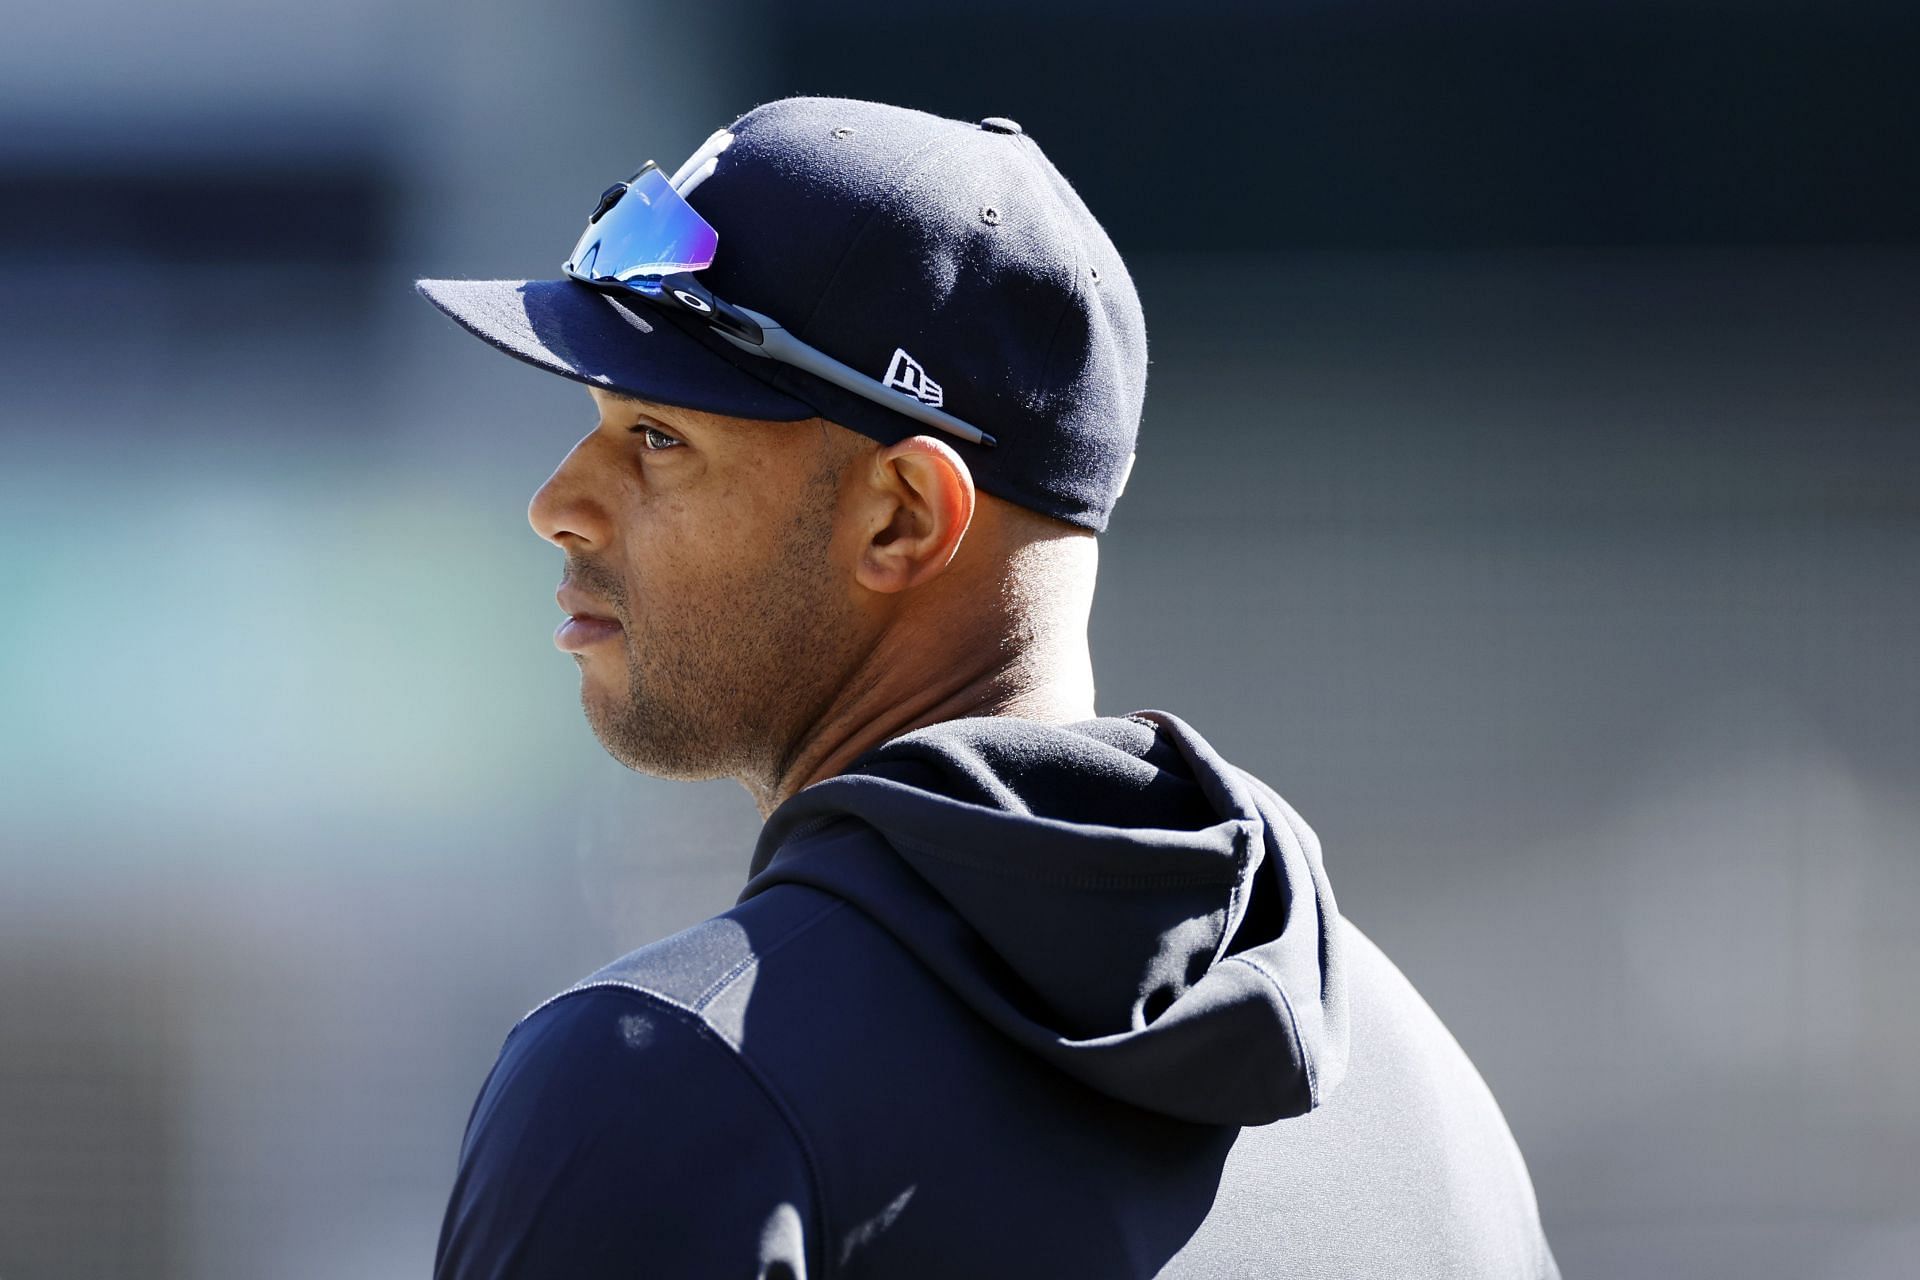 Ex-Yankee Aaron Hicks making most of his change of scenery